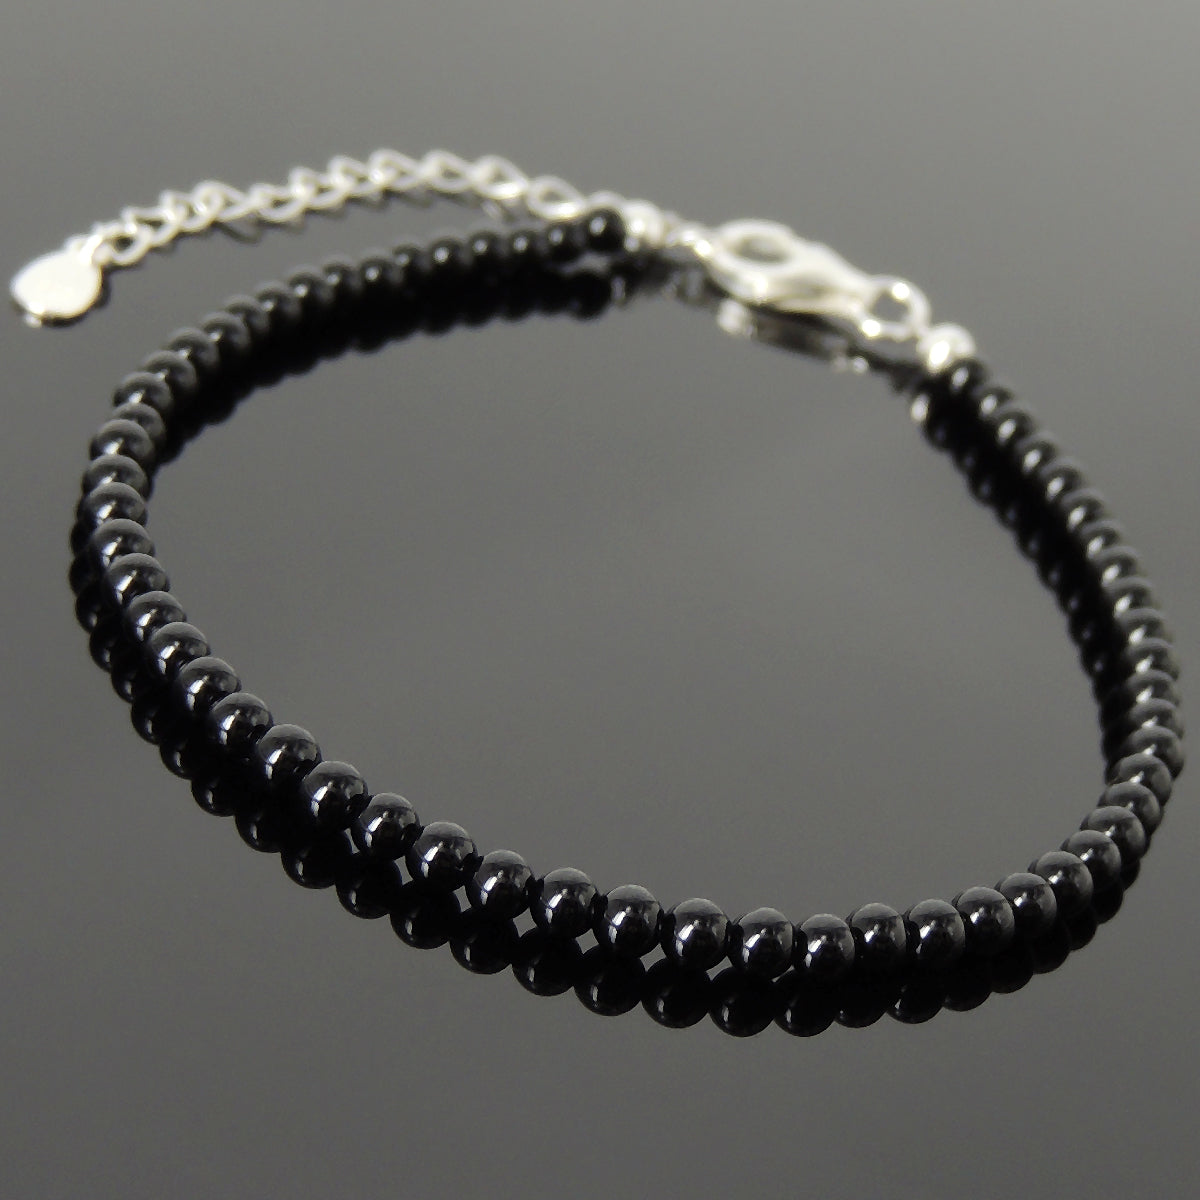 3mm Bright Black Onyx Healing Gemstone Bracelet with S925 Sterling Silver Chain & Clasp - Handmade by Gem & Silver BR1260